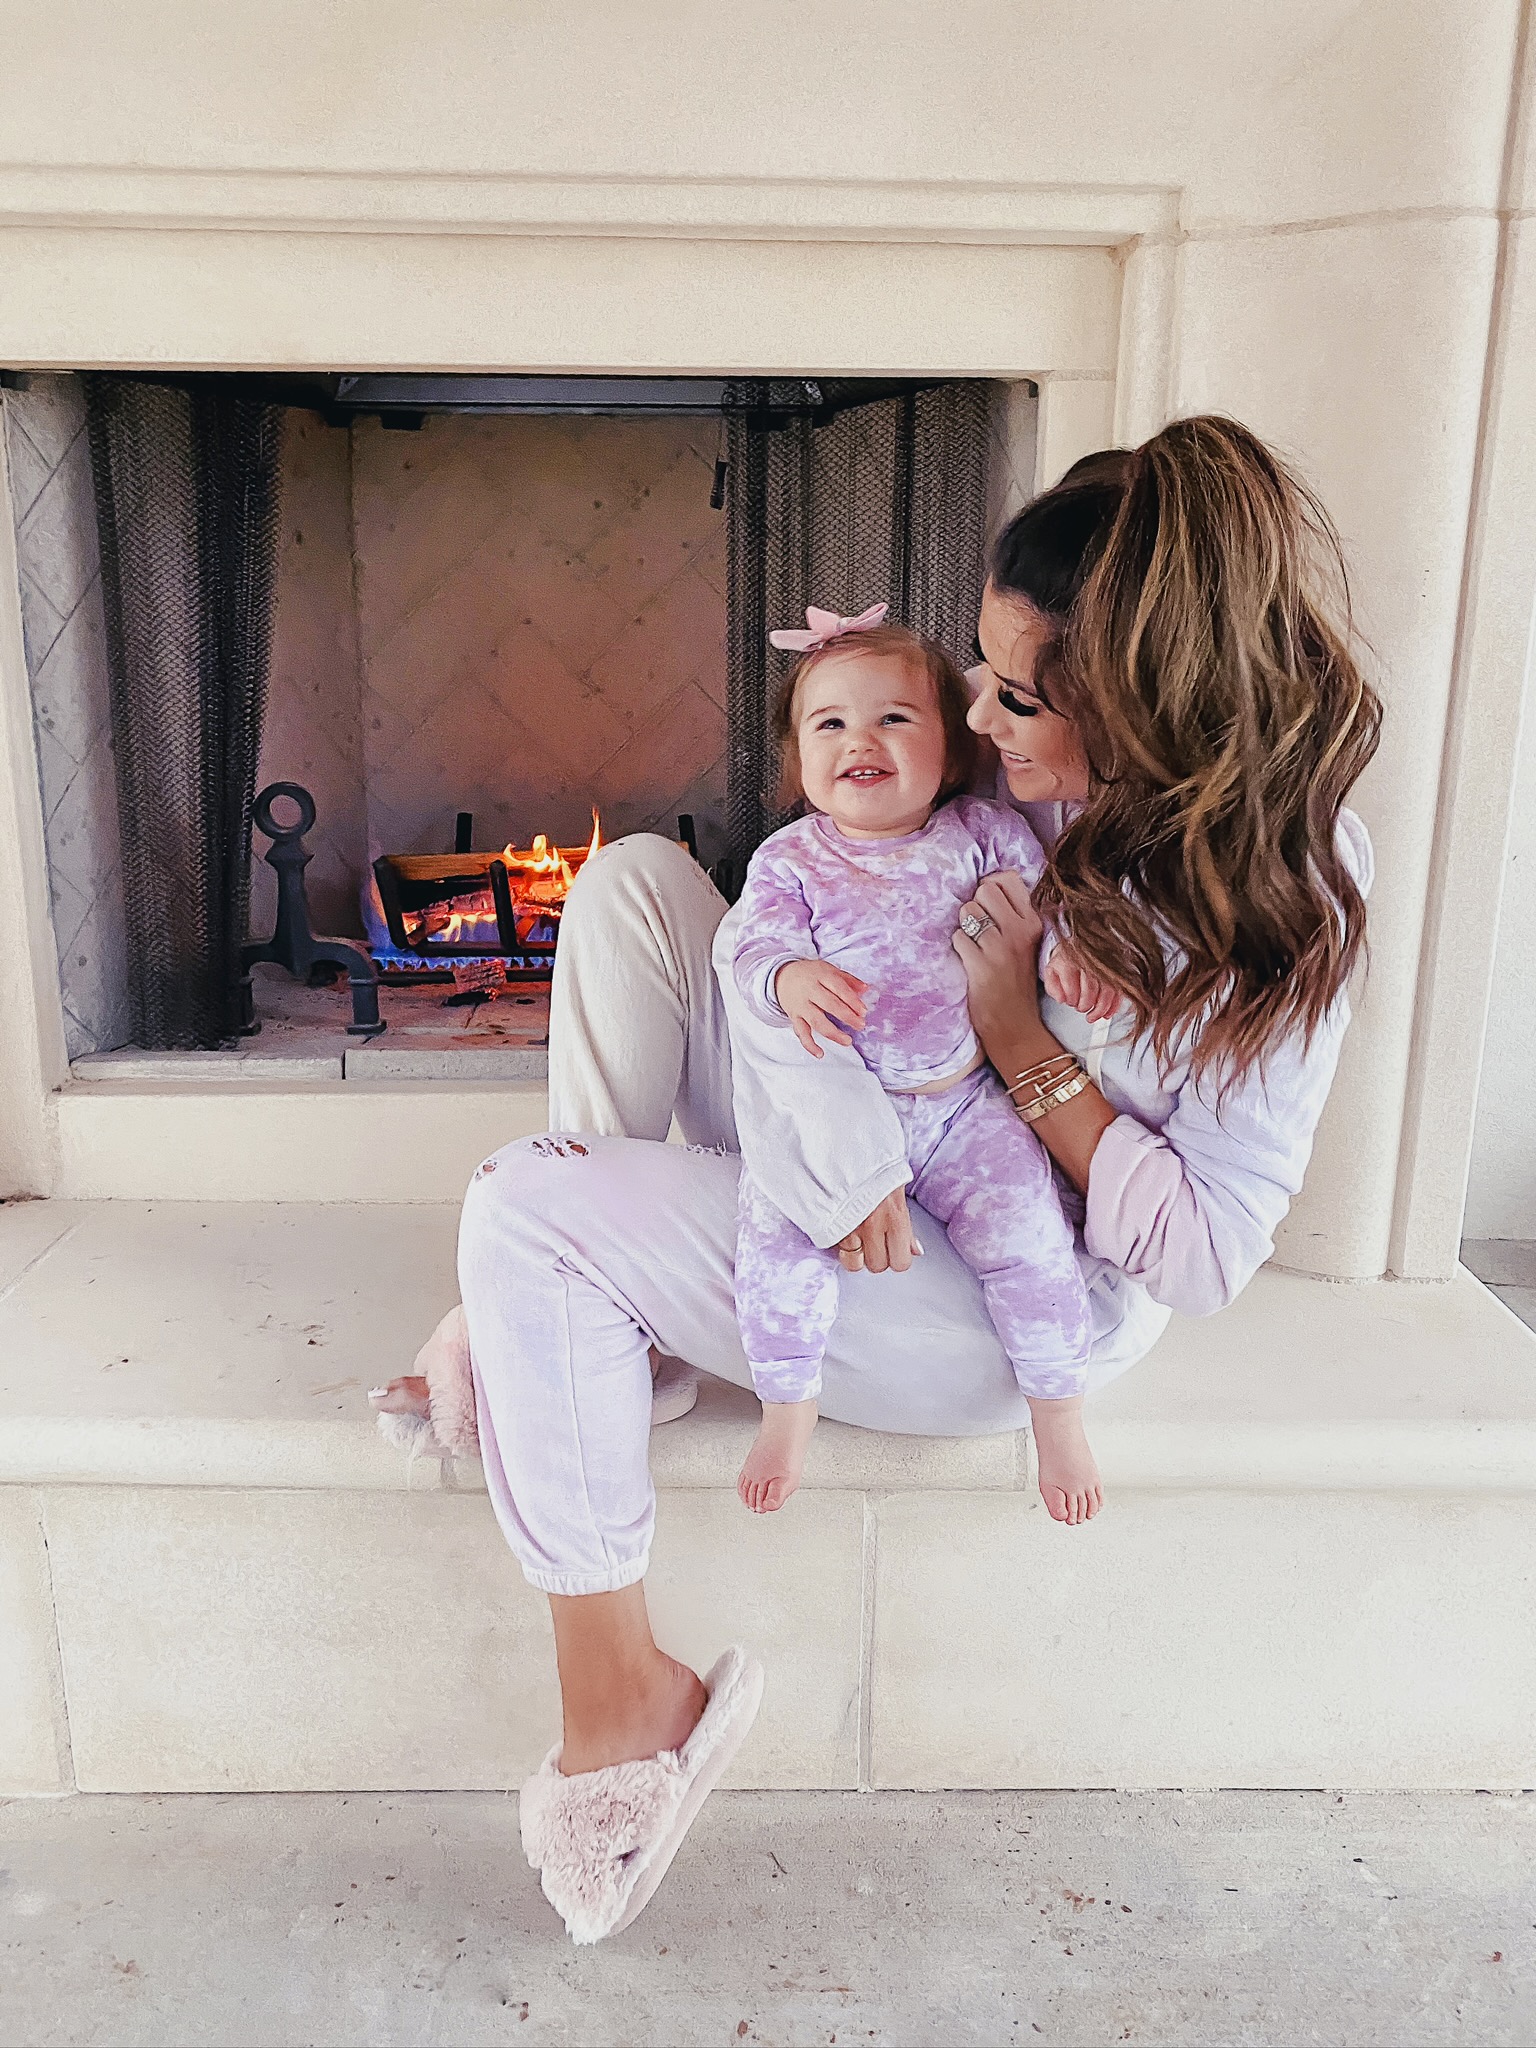 Comfortable Loungewear by popular US fashion blog, The Sweetest Thing: image of Emily Gemma wearing a Z Supply The Pale Blush Rugby Stripe Weekender Sweater and Nordstrom Zella leggings.| Comfortable Loungewear by popular US fashion blog, The Sweetest Thing: image of Emily Gemma and her daughter Sophie wearing a n:philanthropy GAMBLE SWEATSHIRT, n: philanthropy DERBY JOGGER, Amazon HALLUCI Women's Cross Band Soft Plush Fleece House Indoor or Outdoor Slippers, and Amazon VAENAIT BABY 12M-12 Toddler Kids Boys Girls 100% Cotton Marbling Sung Fit Sleepwear Pajamas.